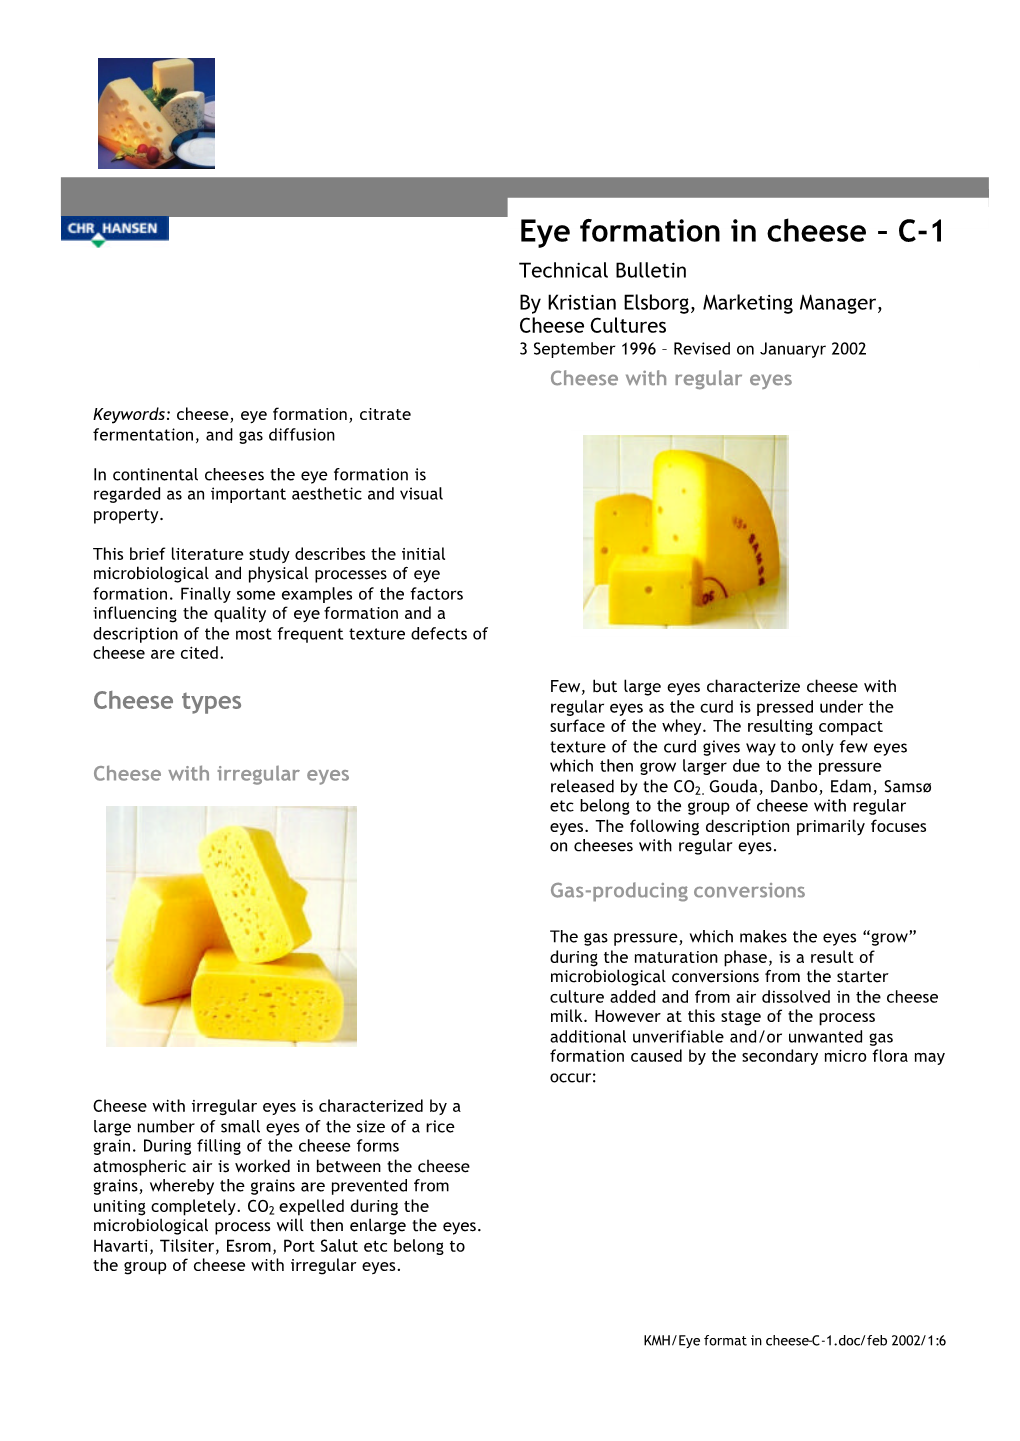 Eye Formation in Cheese – C-1 Technical Bulletin